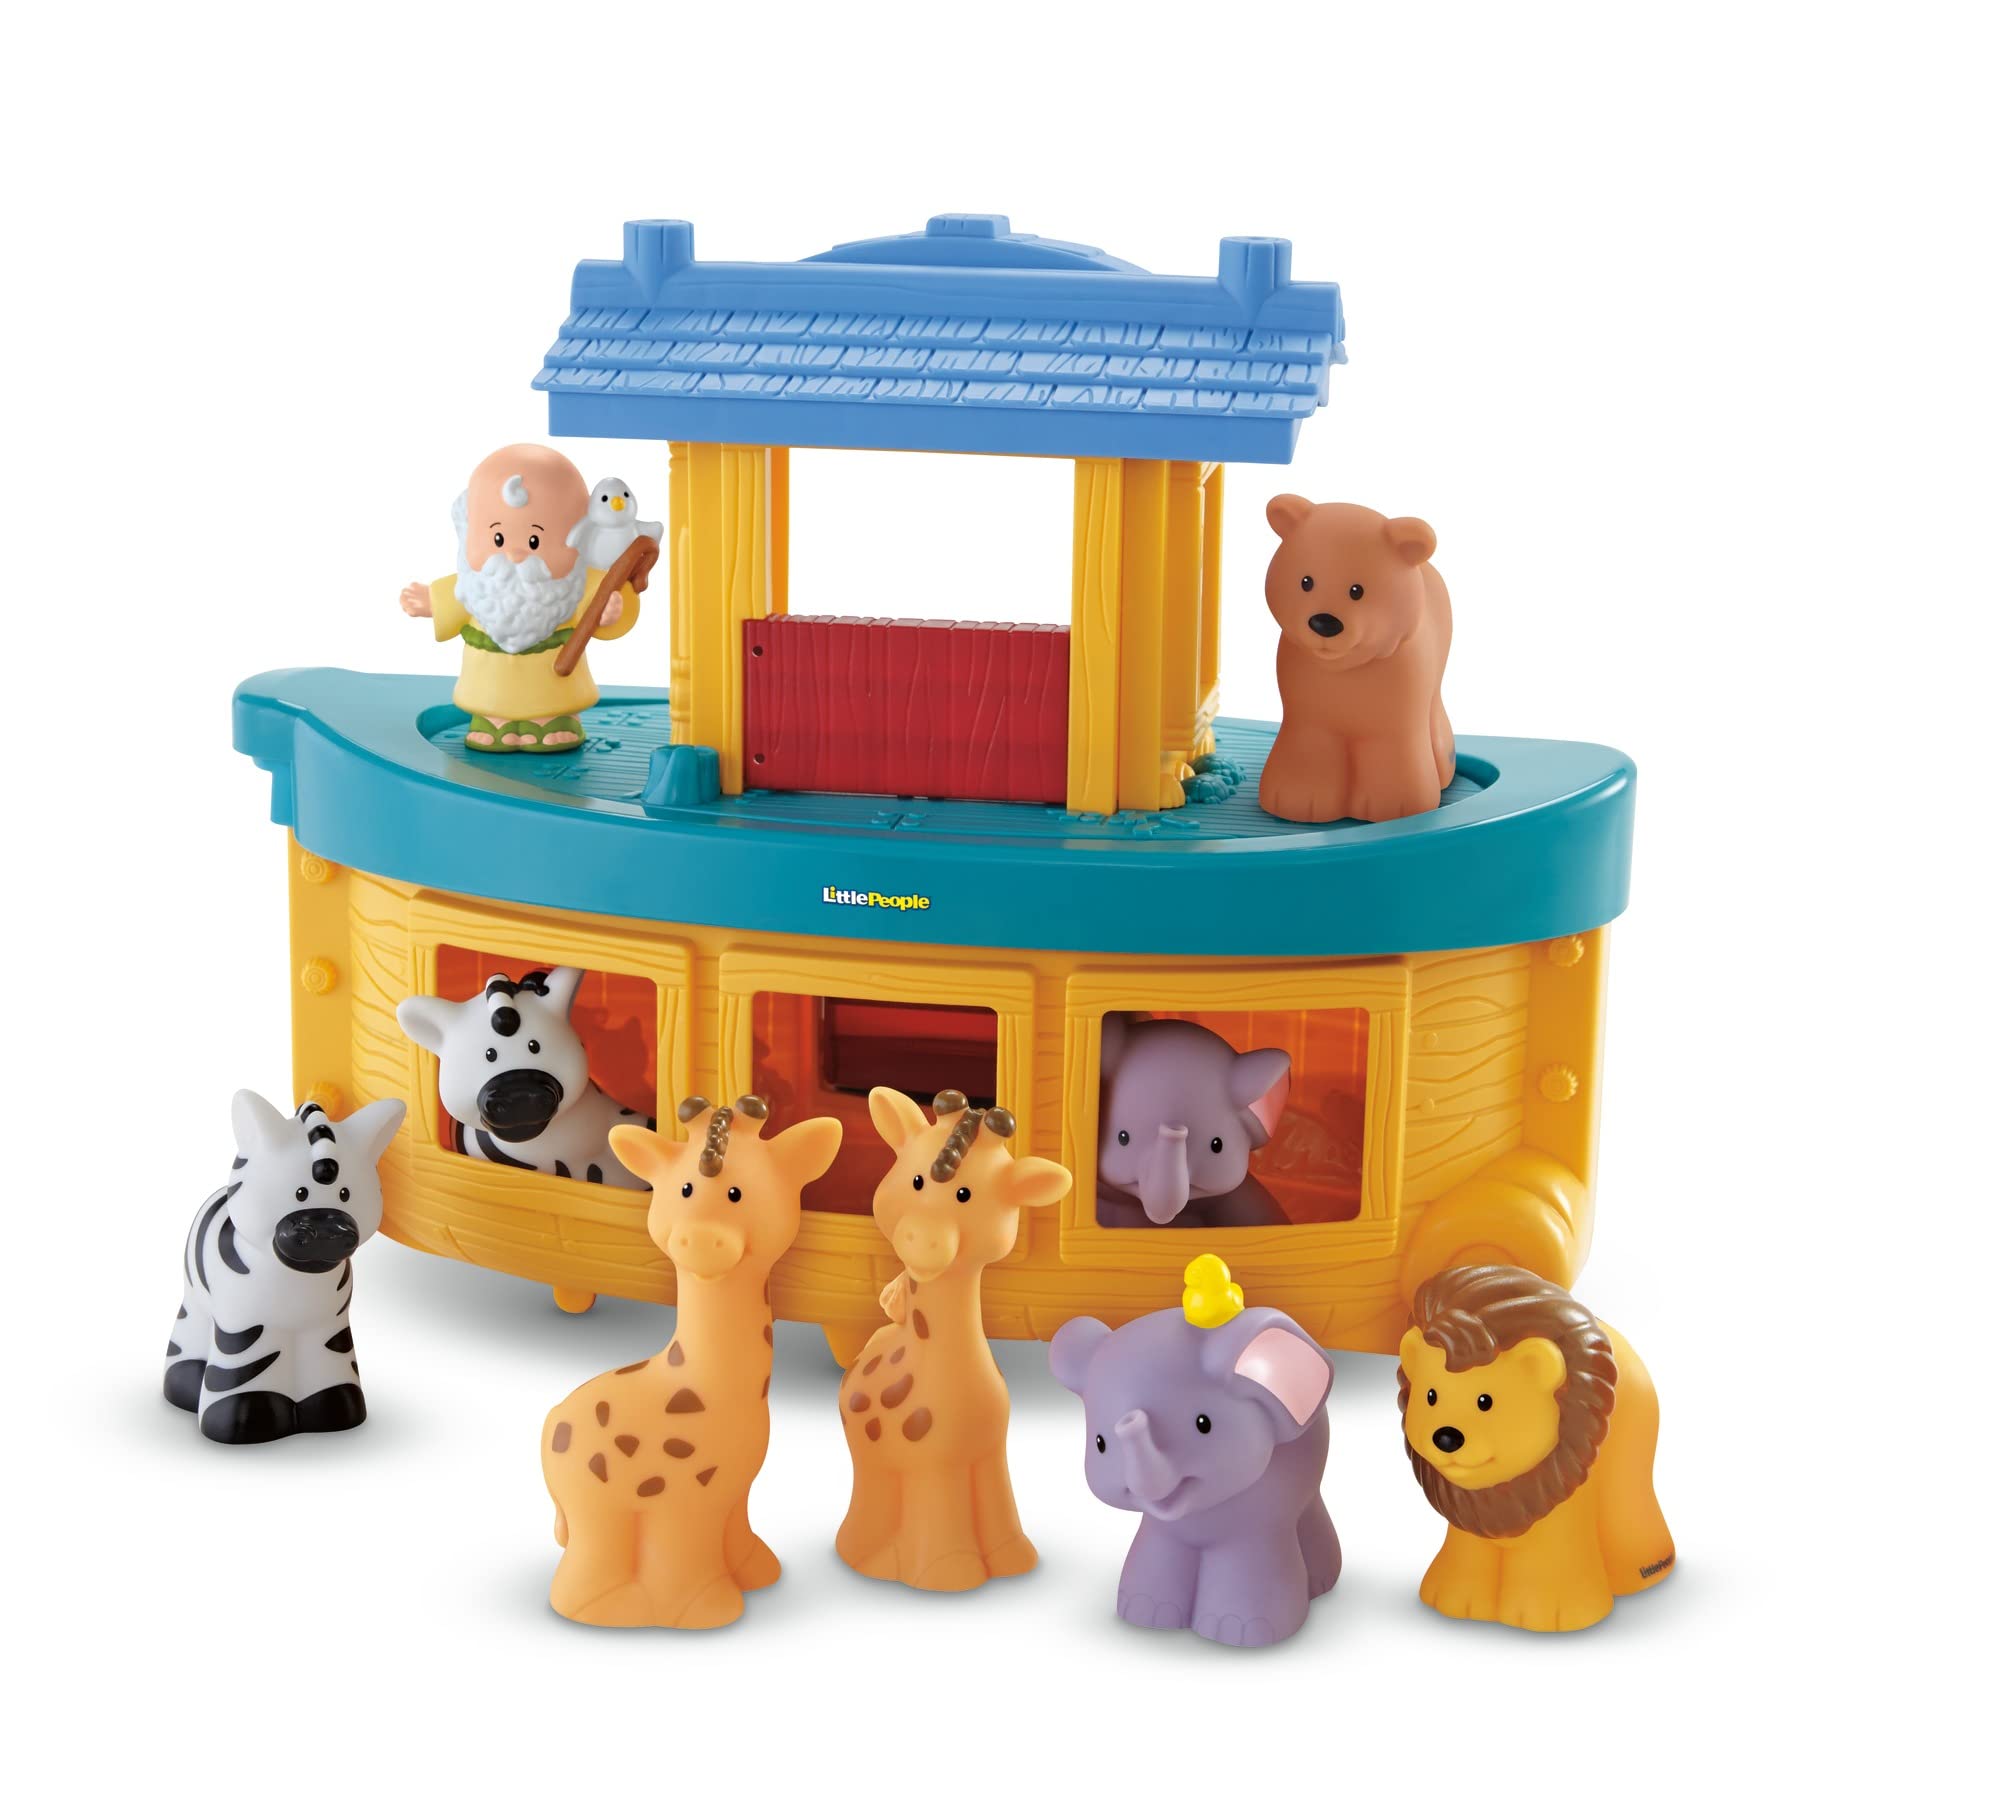 Fisher-Price Little People Toddler Playset, Noah's Ark, Toy Boat with 9 Figures for Preschool Pretend Play Ages 1+ Years